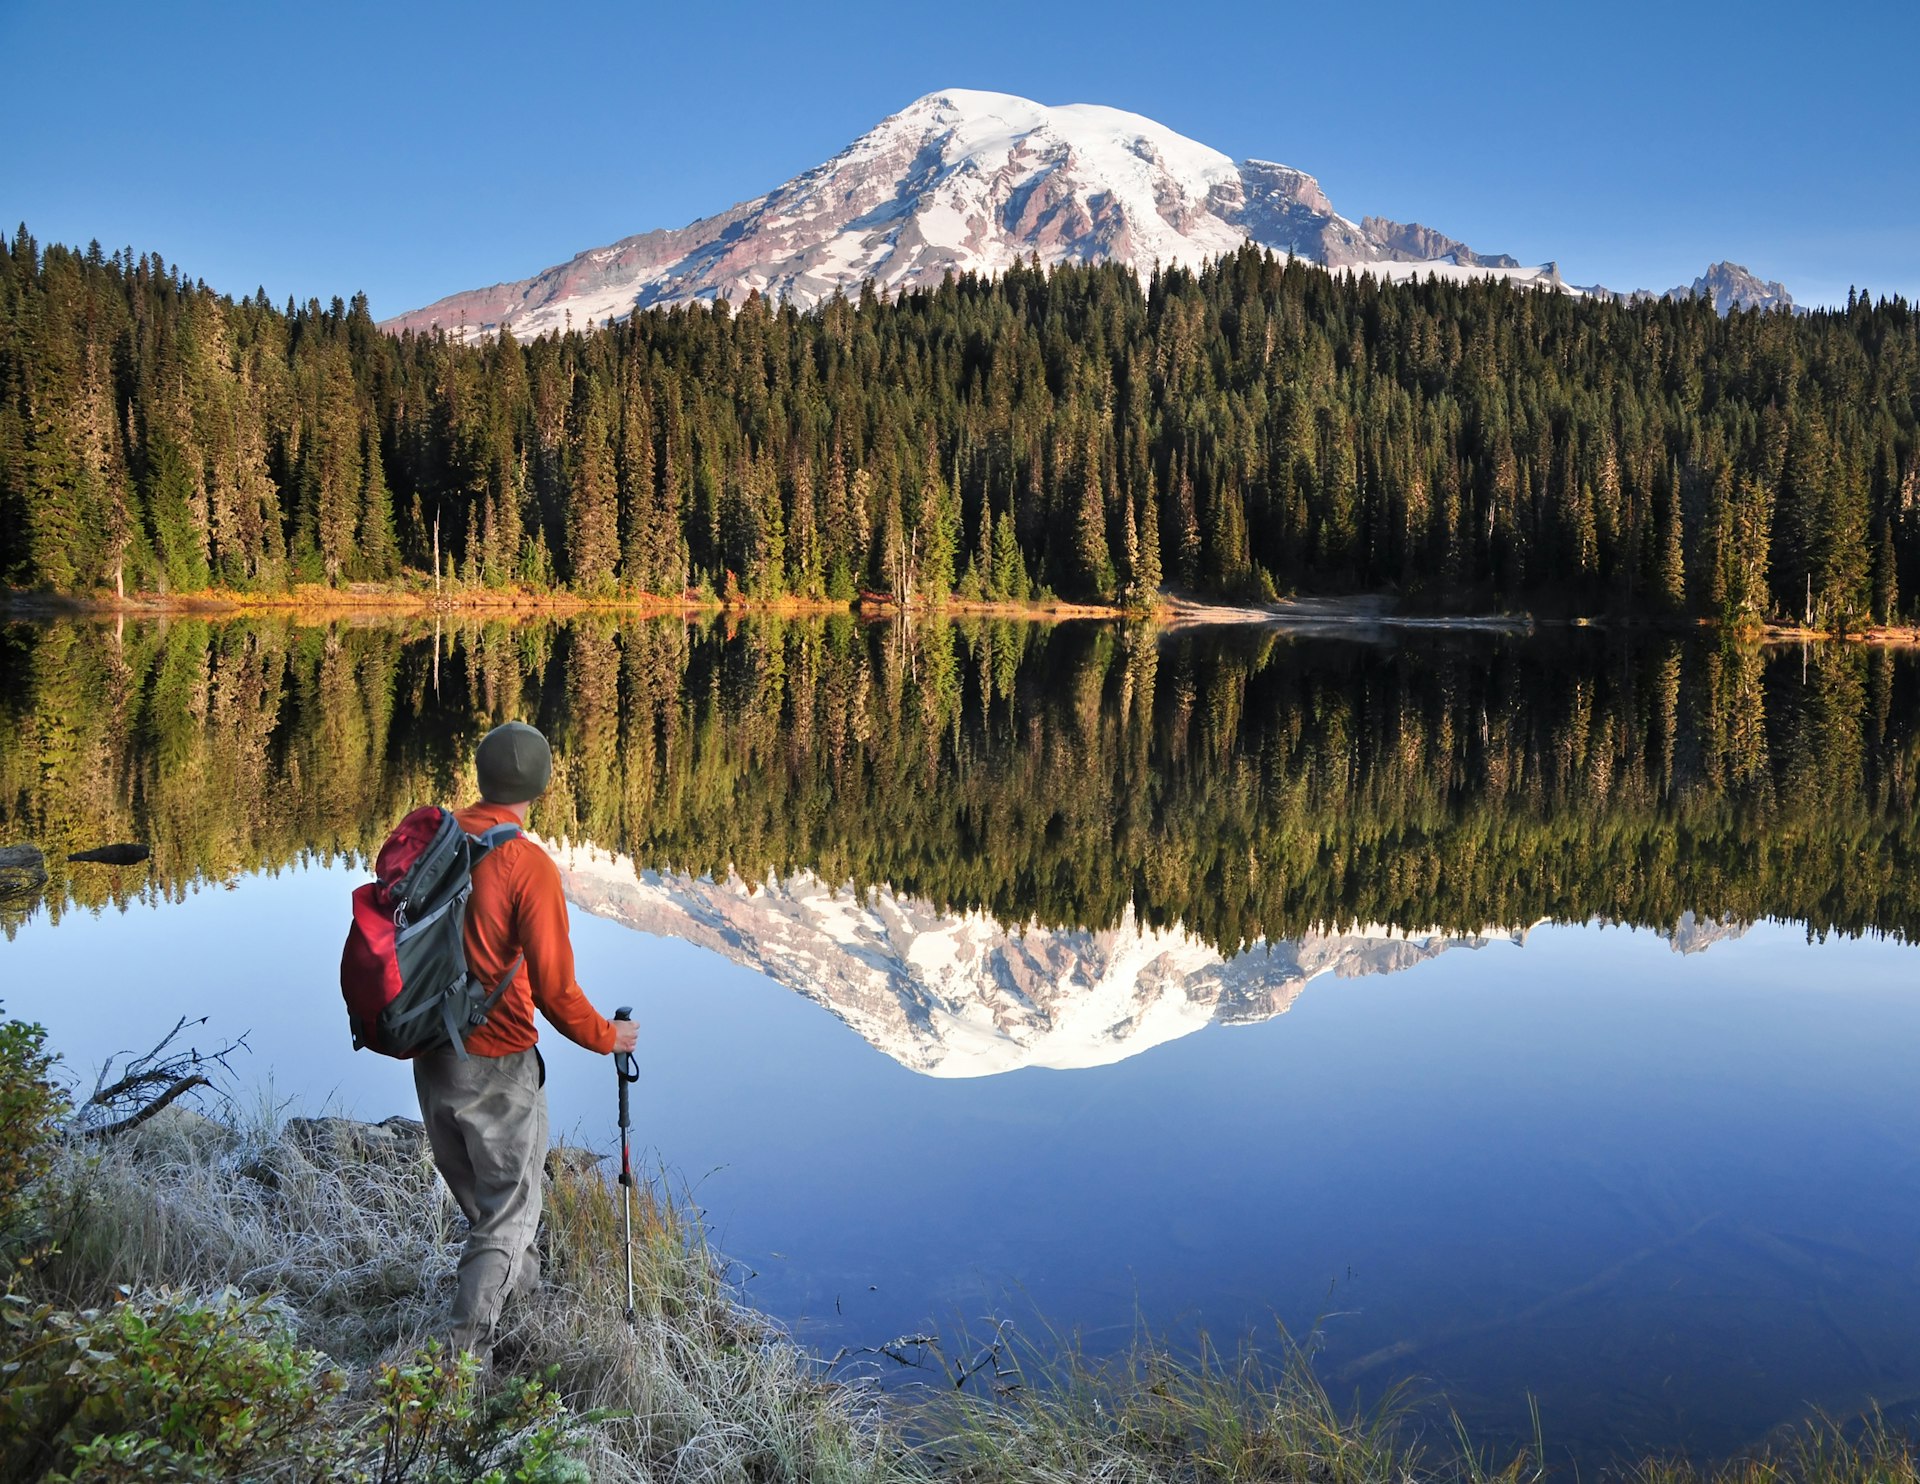 A hiker by a perfectly still Reflection Lake in Mt Rainier National Park, Washington State, USA